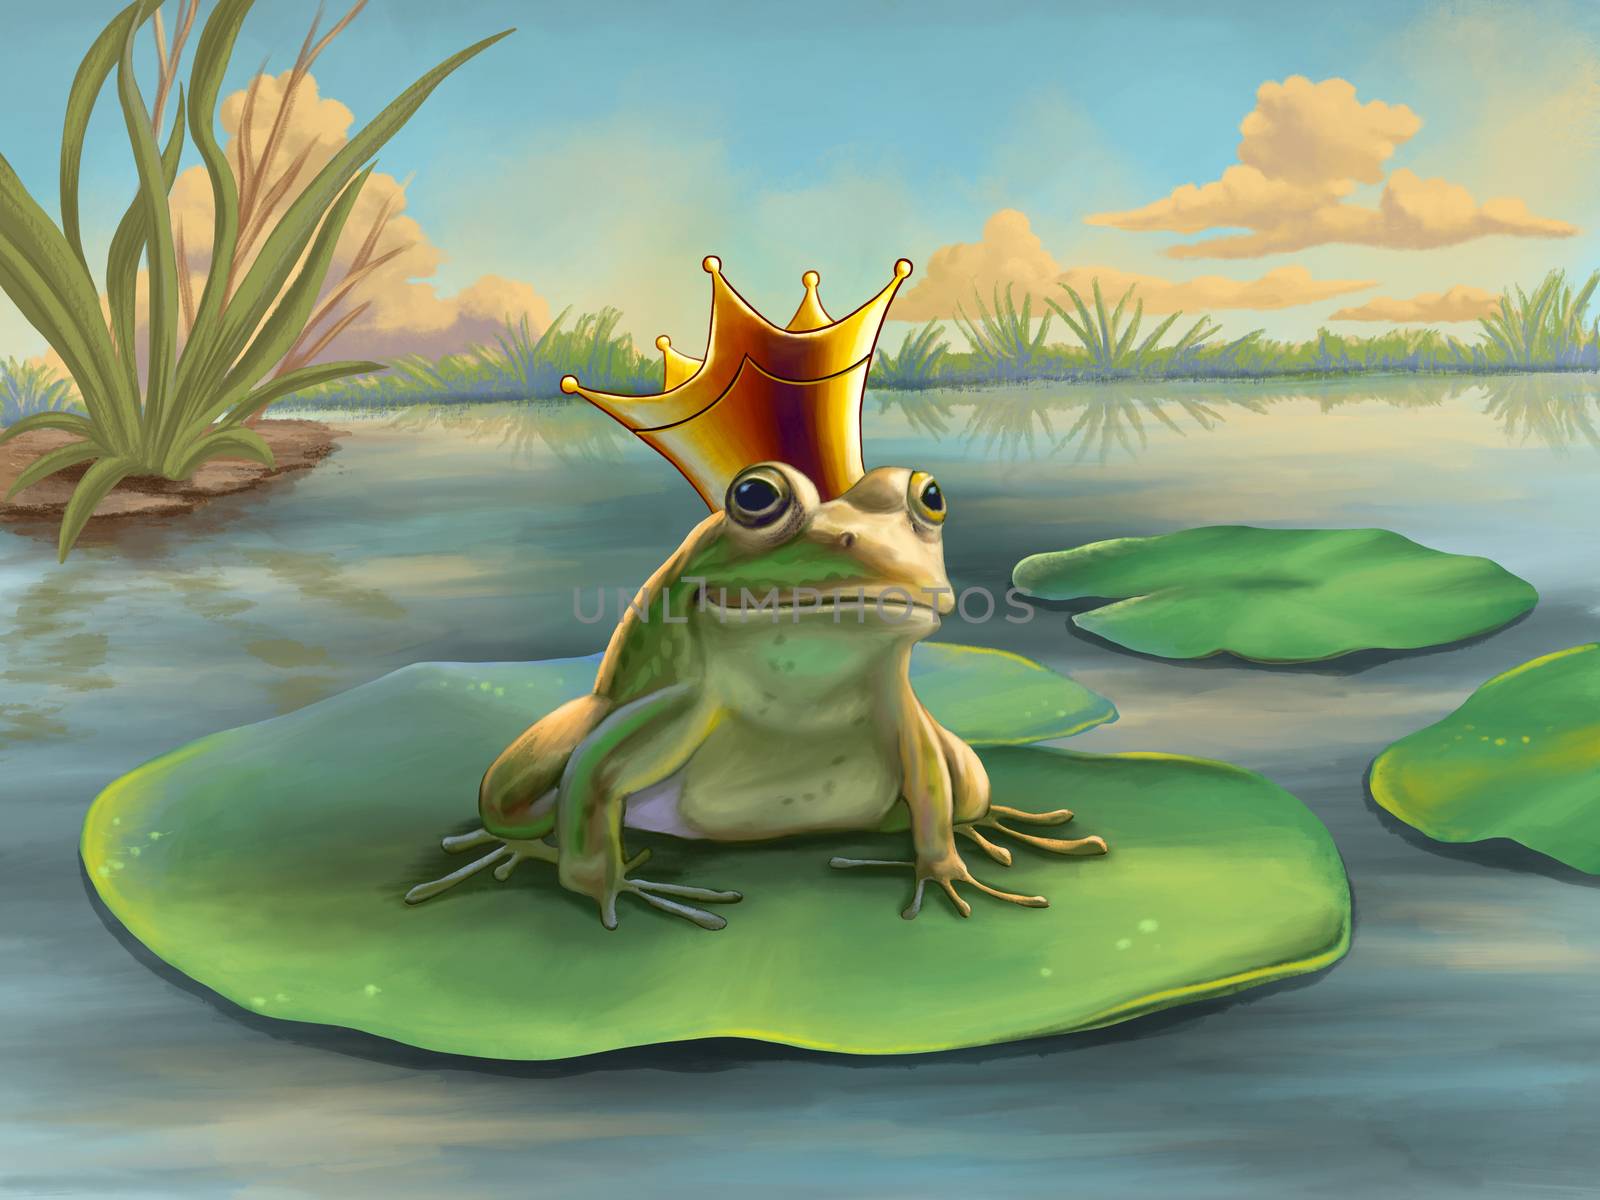 Frog prince waiting on a water lily. Digital illustration.